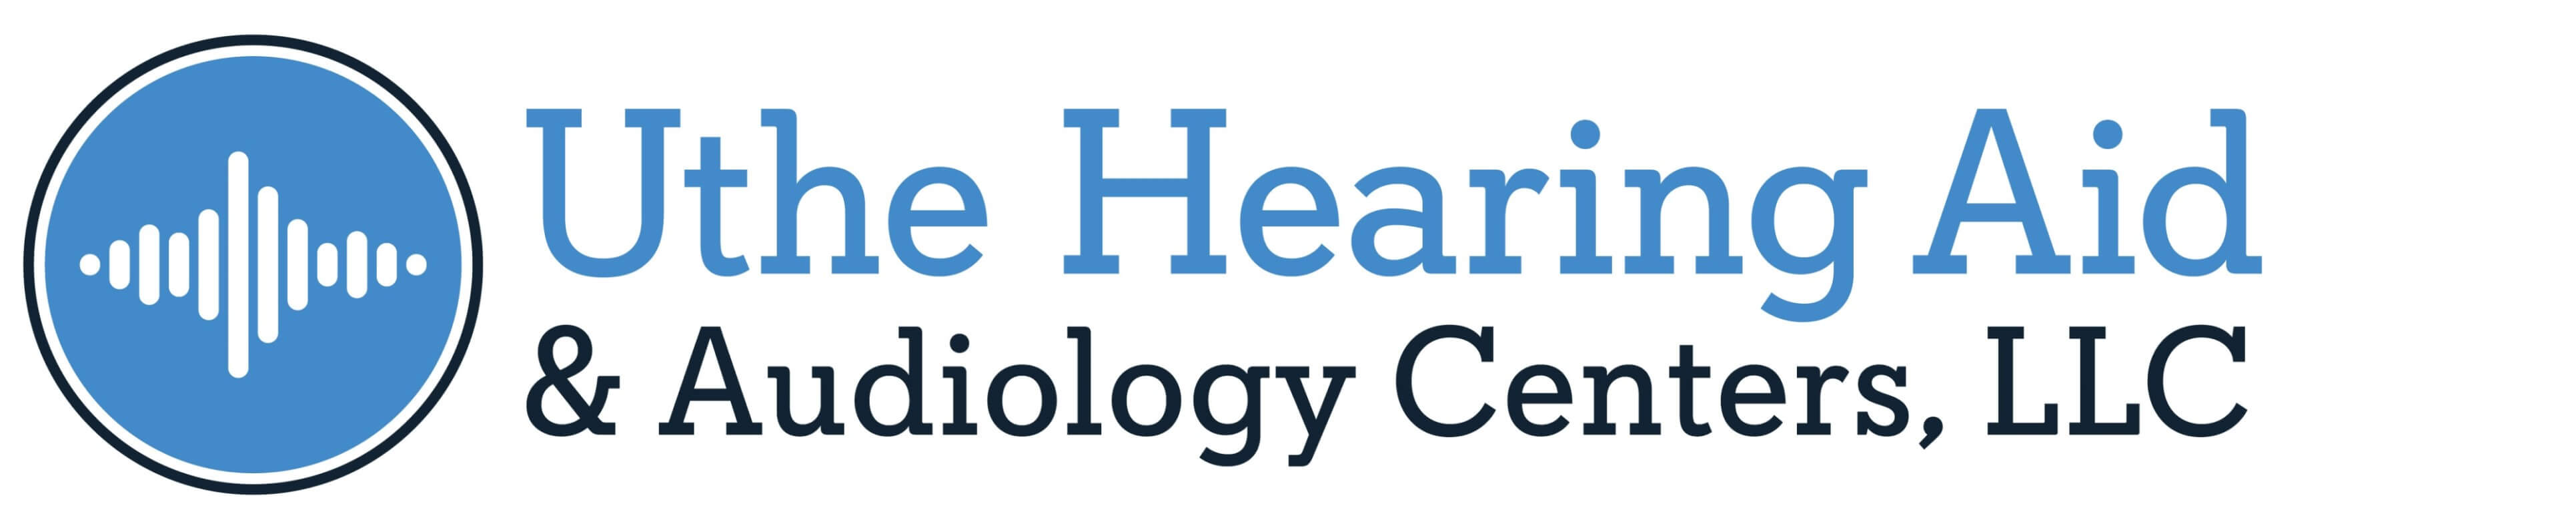 Üthe Hearing Aid and Audiology Centers, LLC logo